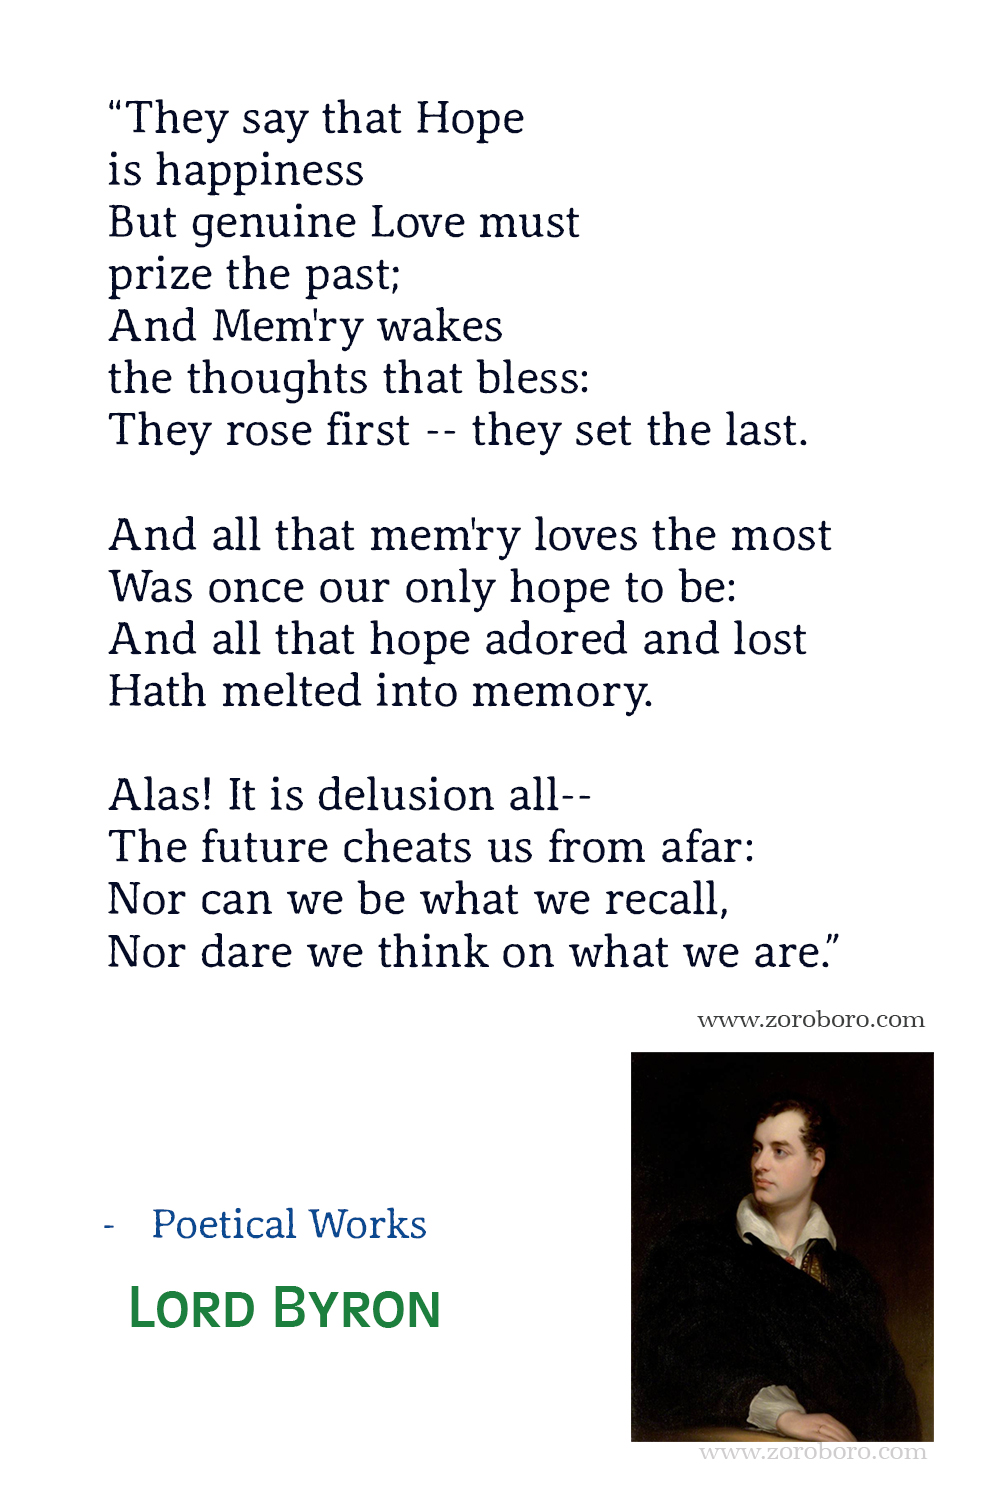 Lord Byron Quotes, Poet, Poetry, Lord Byron Poems, Lord Byron Books Quotes, Lord Byron : Selected Poems, Lord Byron Love, Nature Quotes.